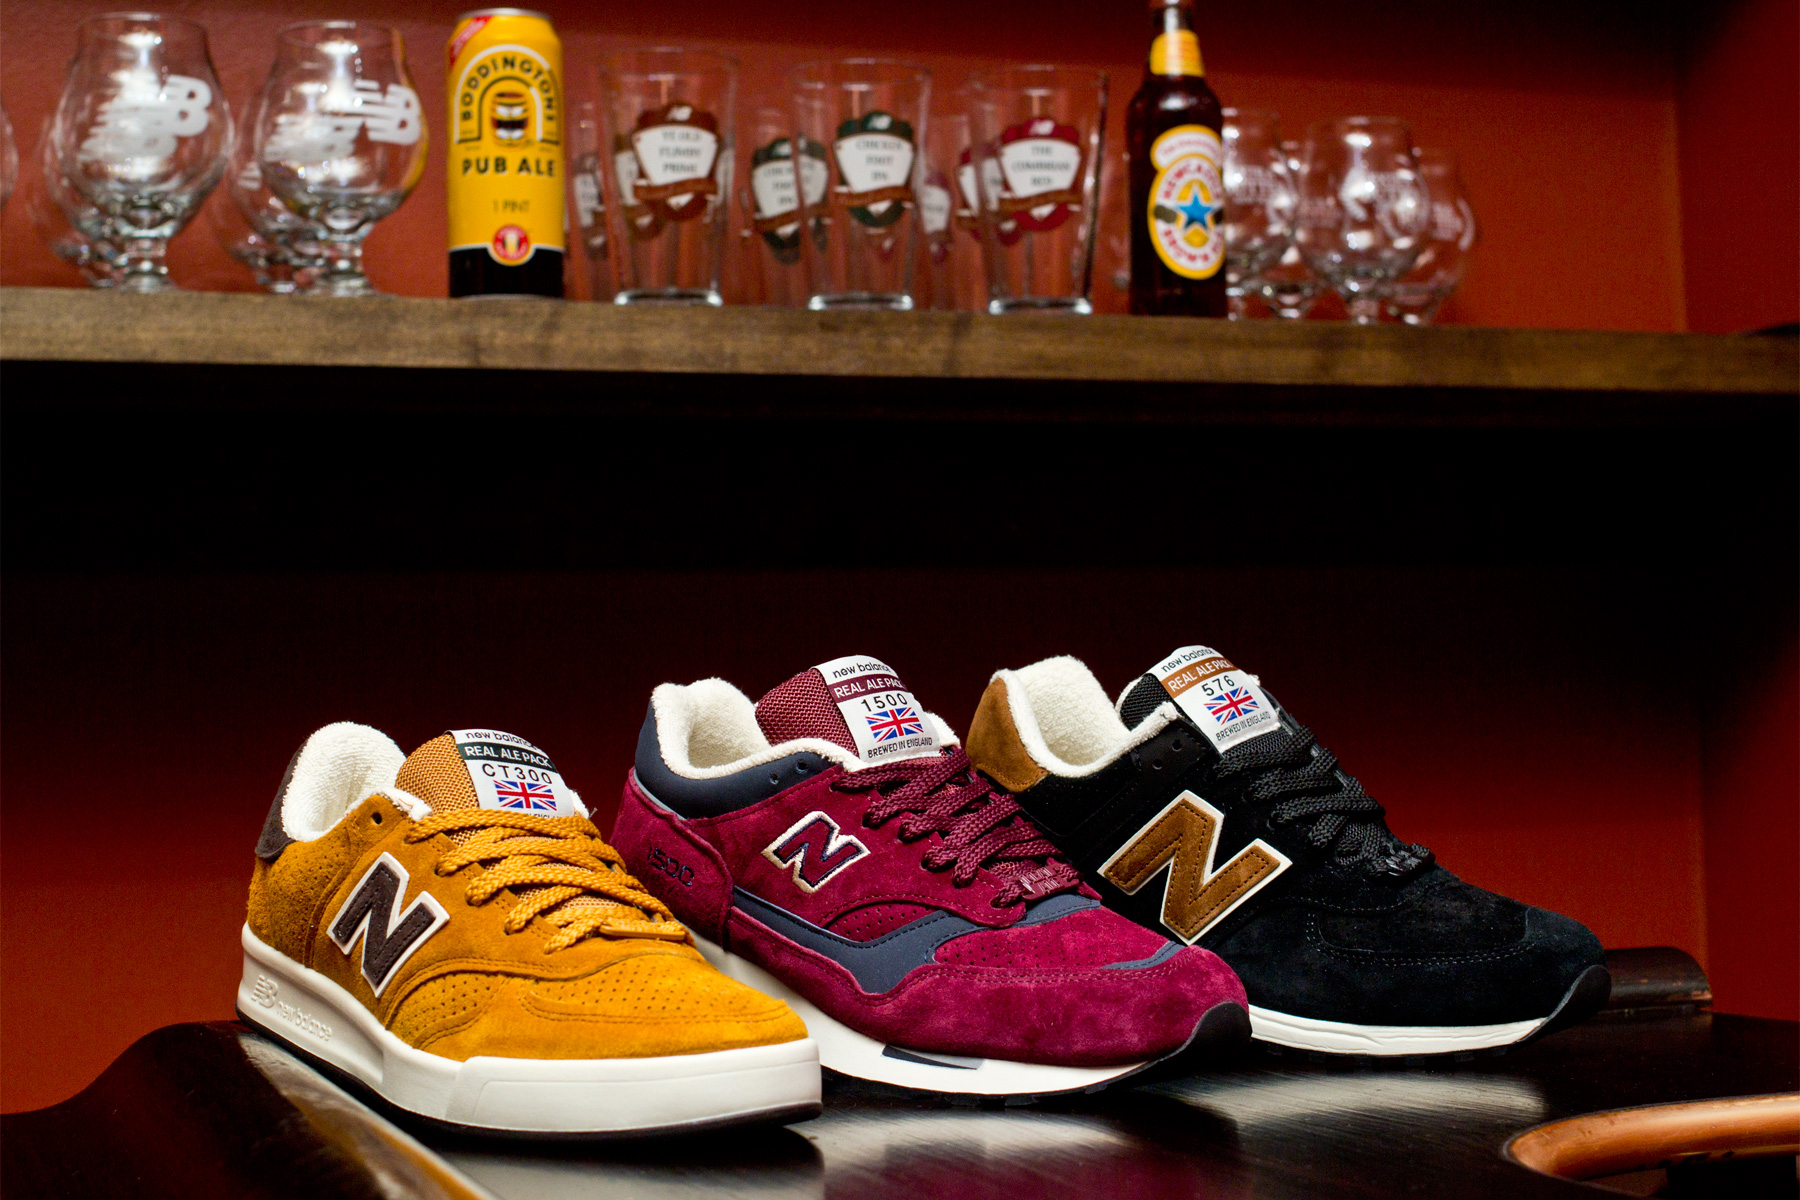 new balance 576 real ale pack